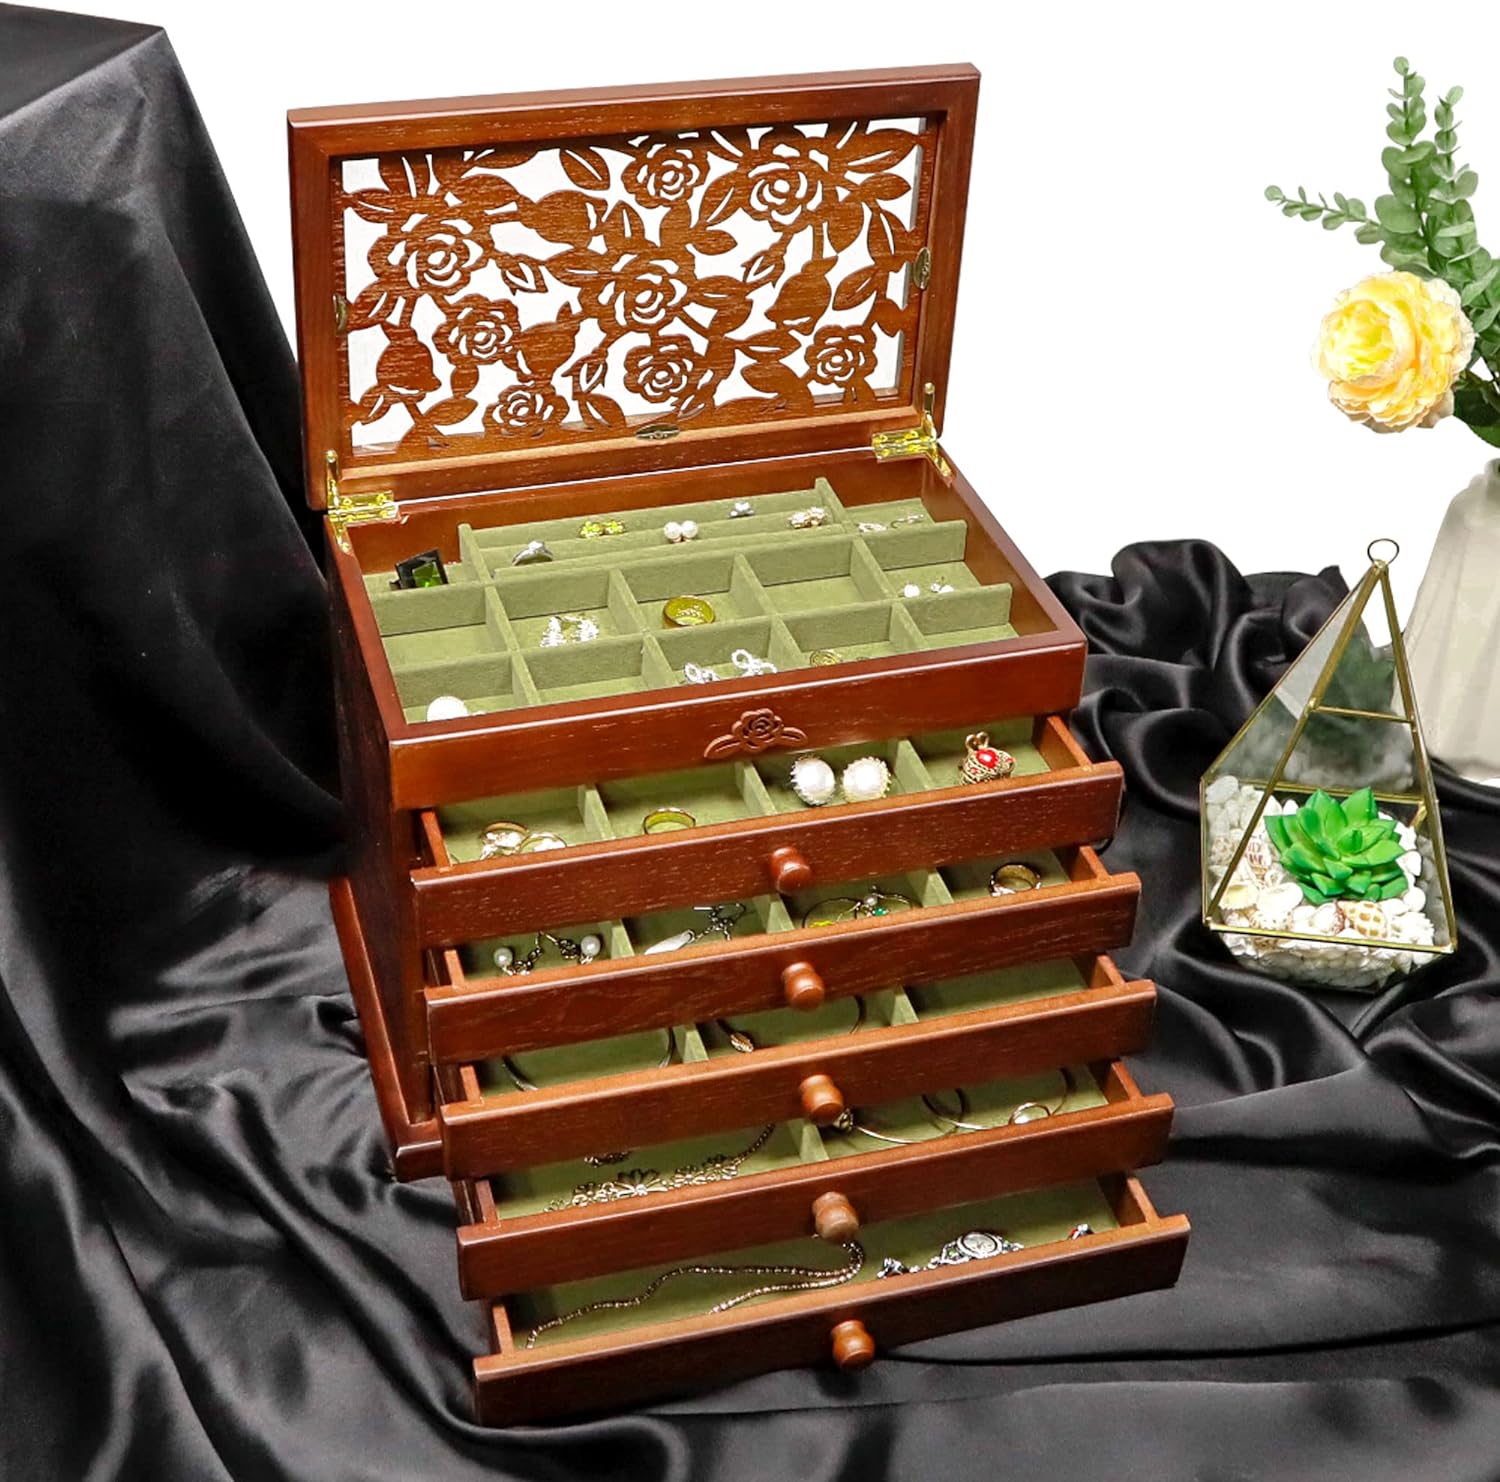 Kendal Wood Jewelry Box for Women, Real Wooden Jewelry Holder Organizer Box with Leaf Patterns, 6 Layer Jewelry Boxes for Storage Earrings Rings Necklace Bracelet, Ideal Gift for Womens Day